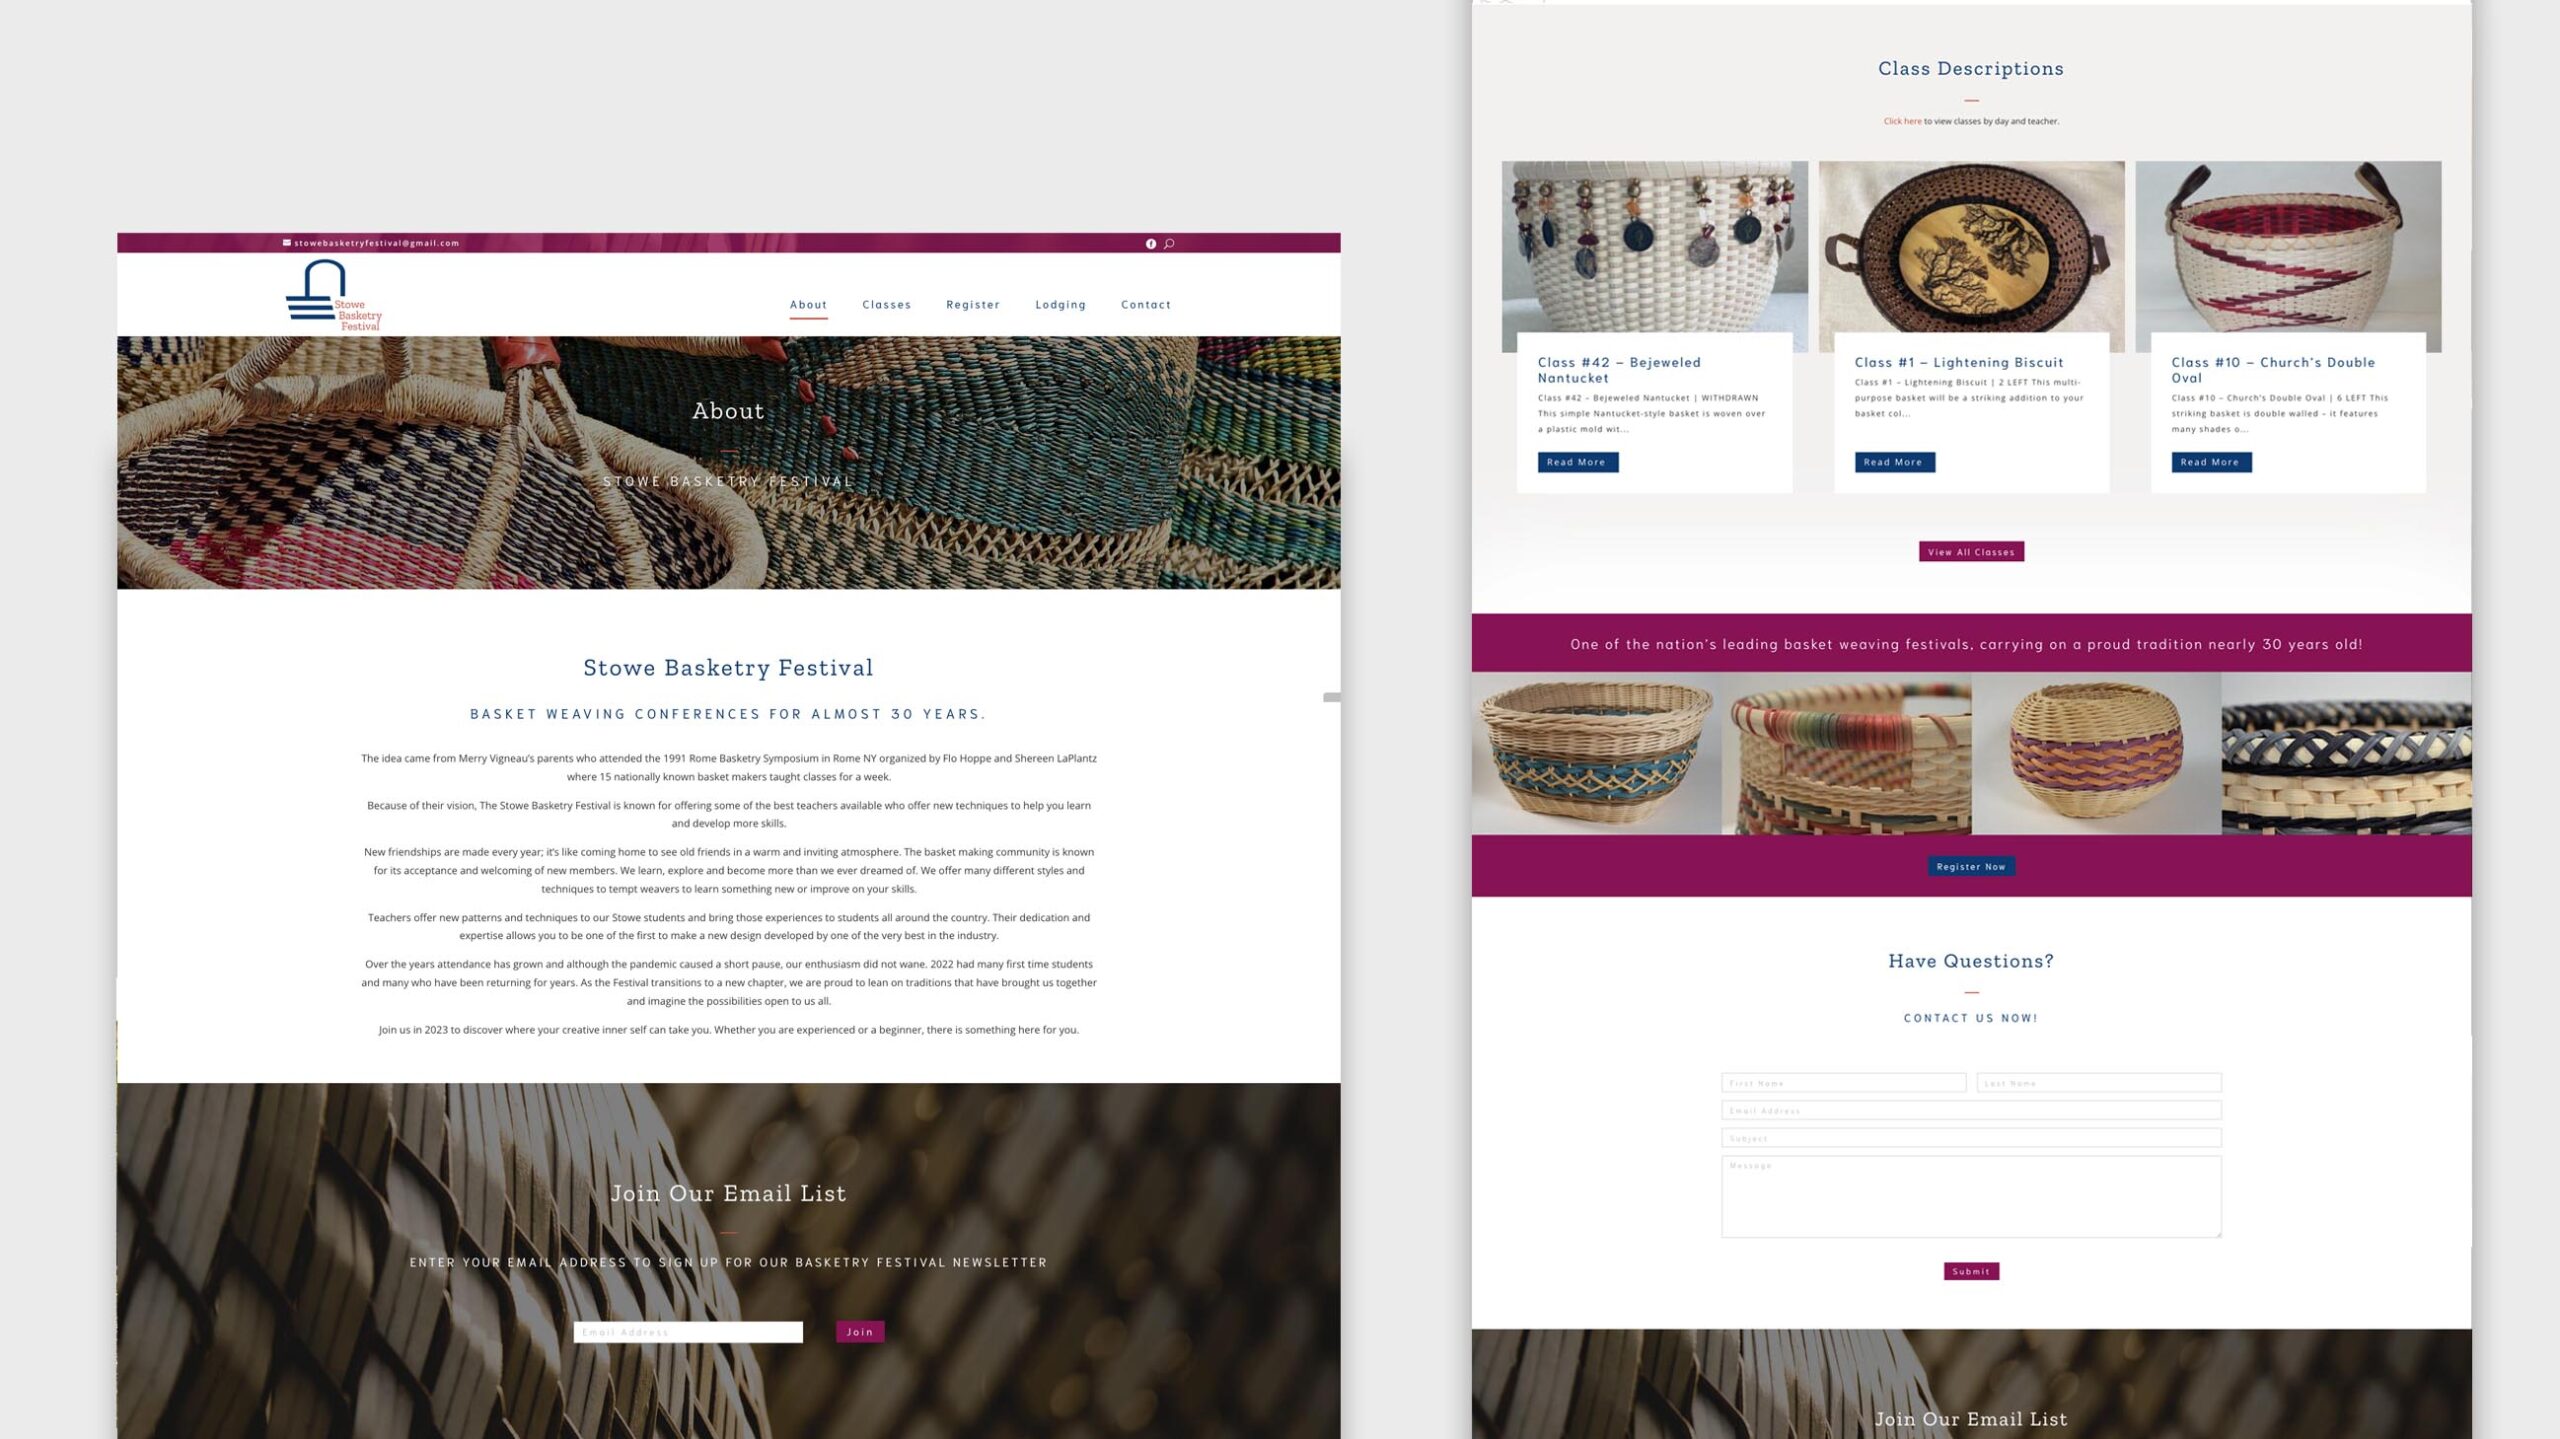 Stowe Basketry Festival Web Design and Development